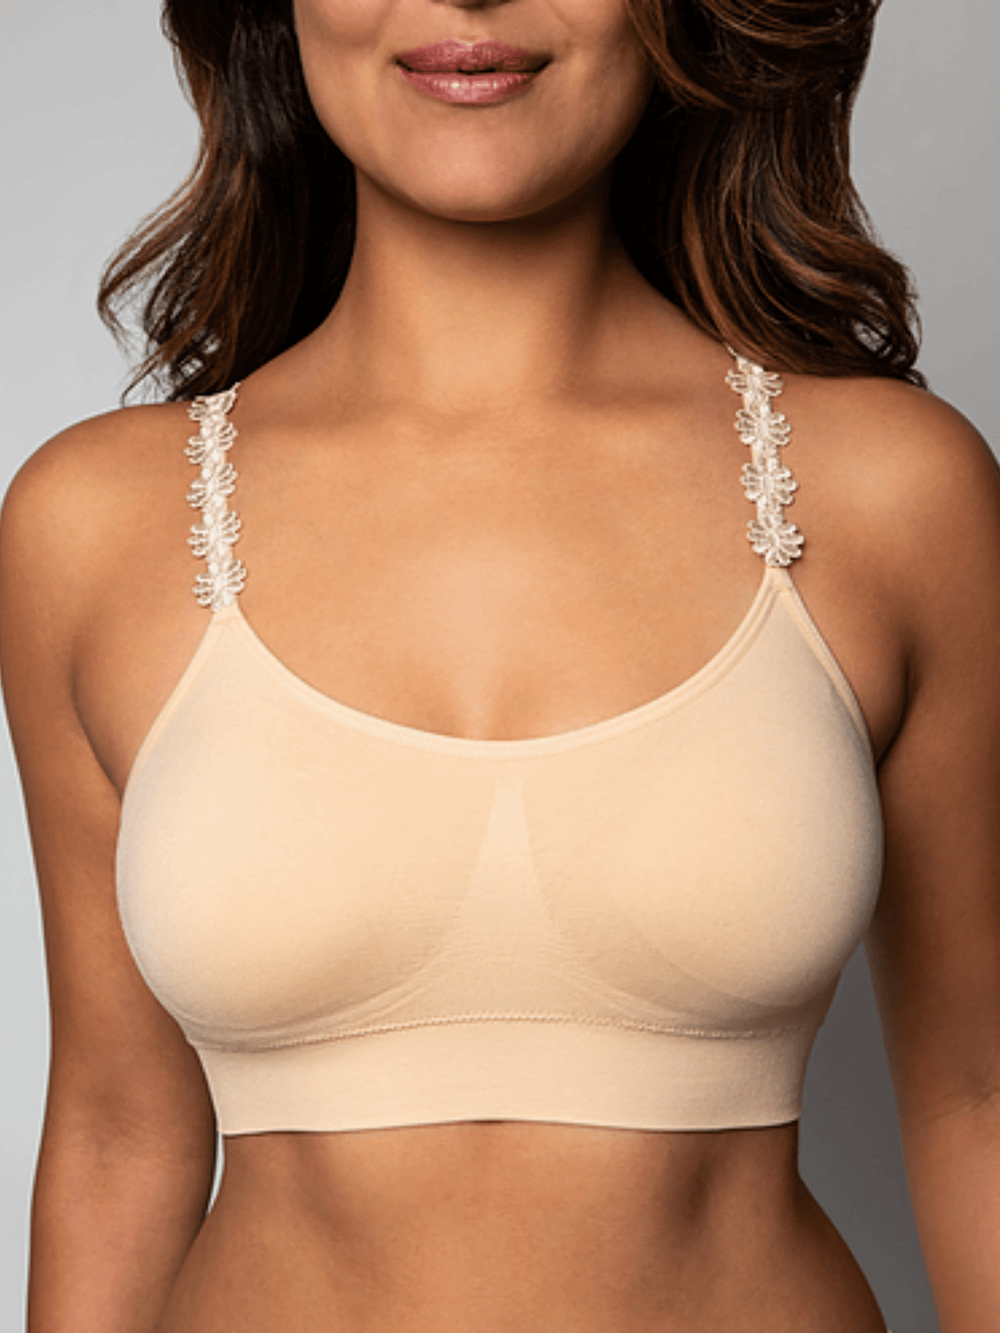 STRAP-ITS clothing Flower Strap Bralette (Nude)